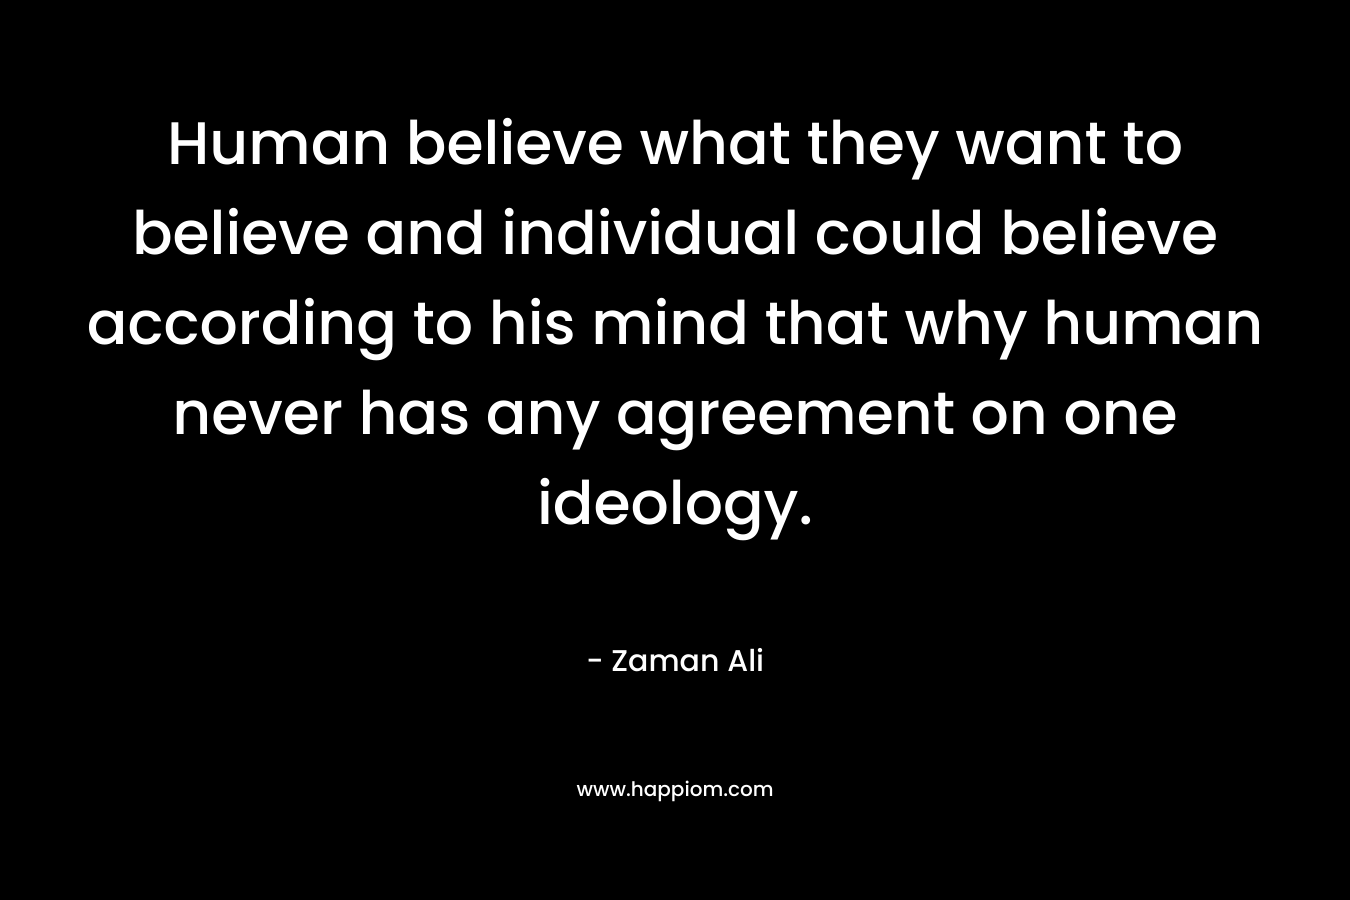 Human believe what they want to believe and individual could believe according to his mind that why human never has any agreement on one ideology.